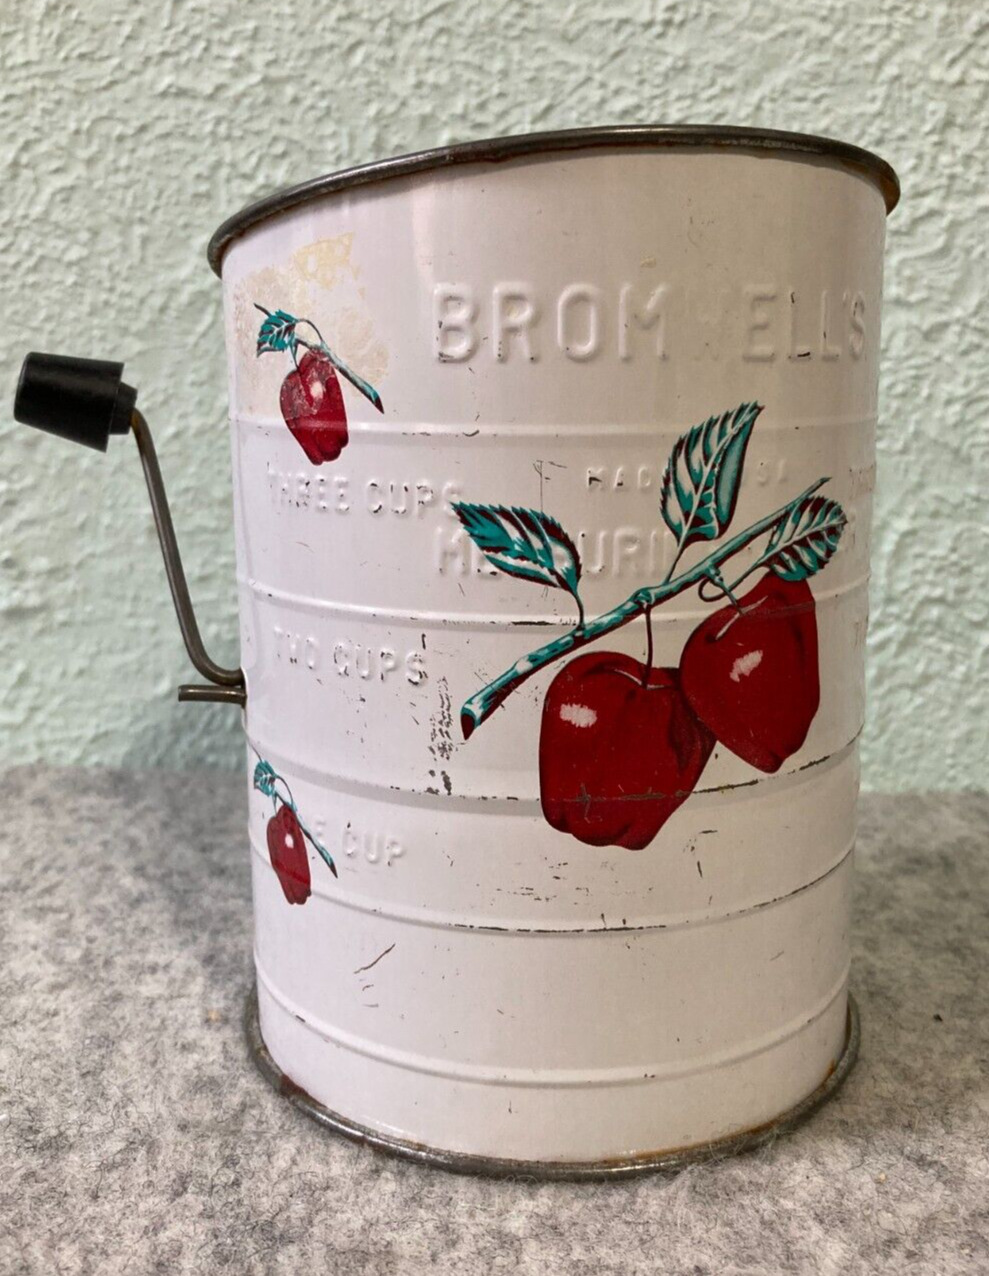 Vintage Kitchen Bromwell\'s Tin Metal Flour Sifter Red Apple Design 3 Cups